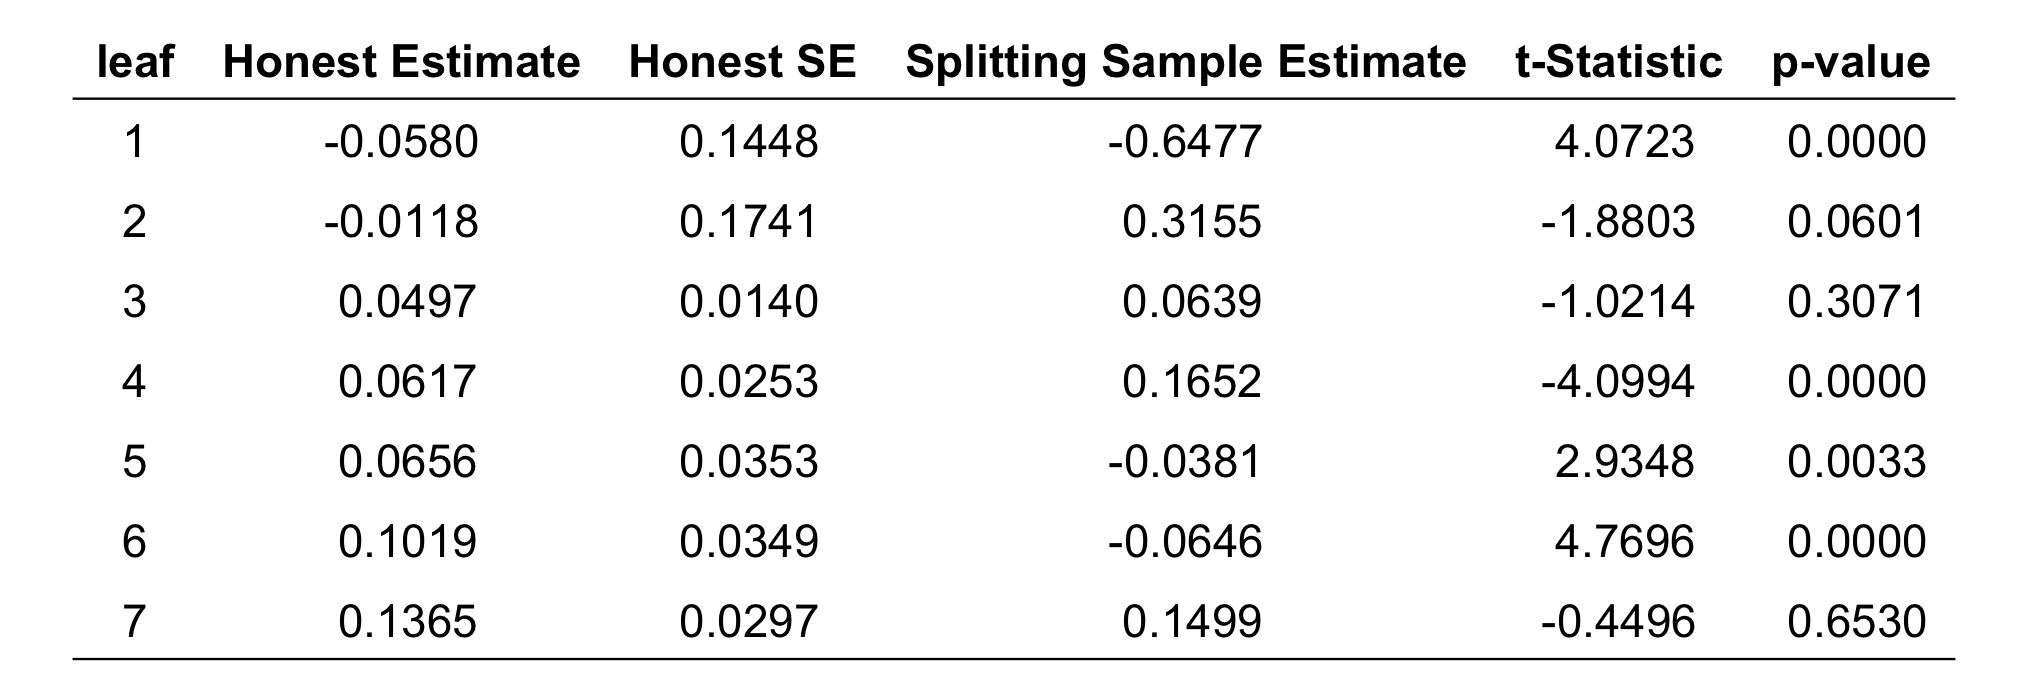 Comparison of average treatment effect estimates in the leaves by whether they were calculated in the first part of the sample, where the tree is fitted (“Splitting Sample Estimate”), or in the second part of the sample (“Honest Estimate”), which was set aside when fitting the tree. The “Honest SE” are the standard errors of the honest estimates in the second part of the sample. For each leaf, the table also includes the t-statistic and the p-values for the test that the “Honest Estimate” and the “Splitting Sample Estimate” are the same, based on the honest standard error. Leaves are ordered by honest estimates.